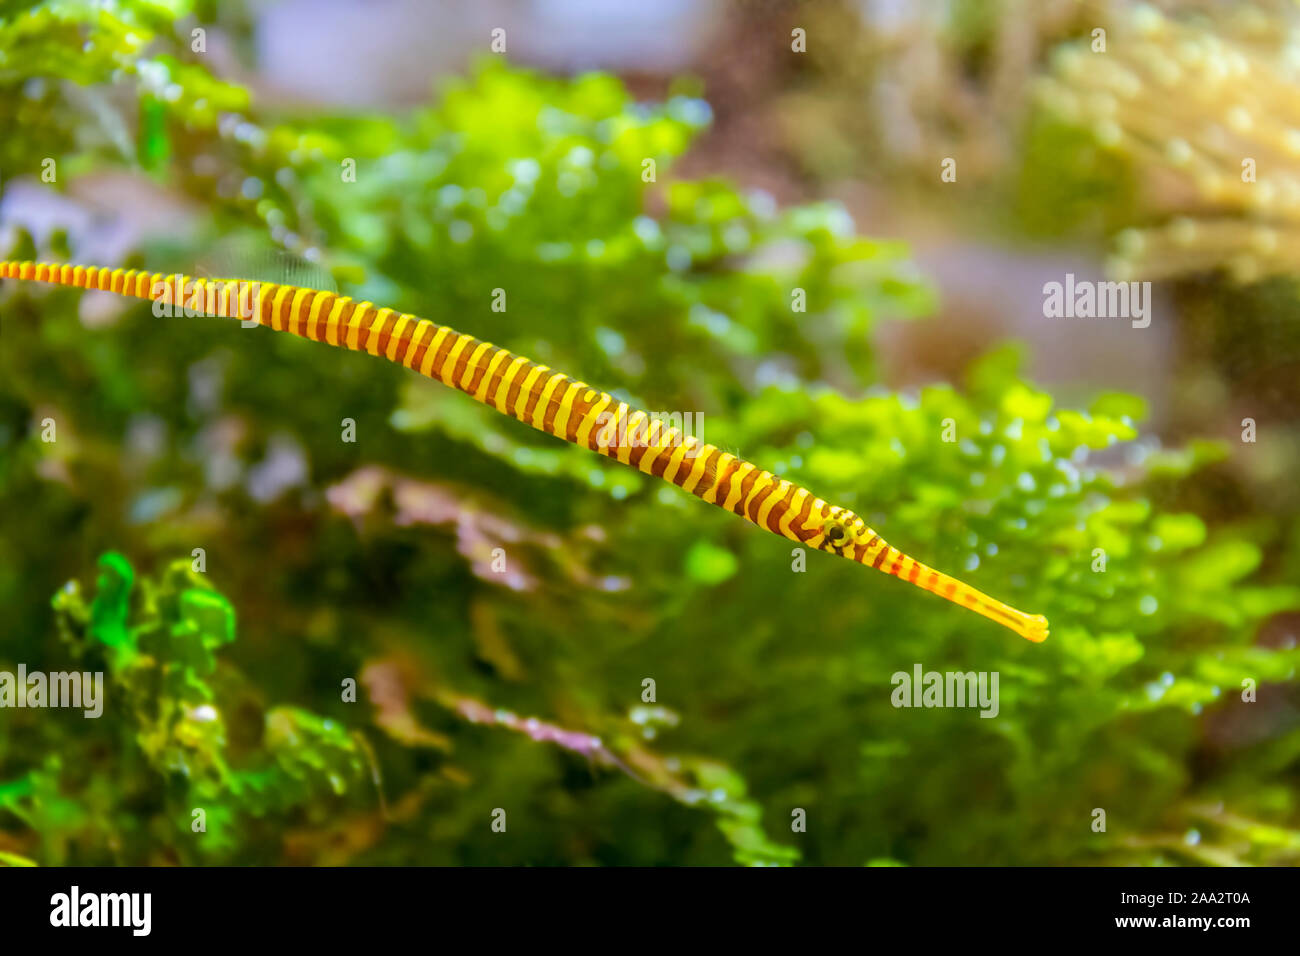 yellowbanded pipefish in natural underwater ambiance Stock Photo